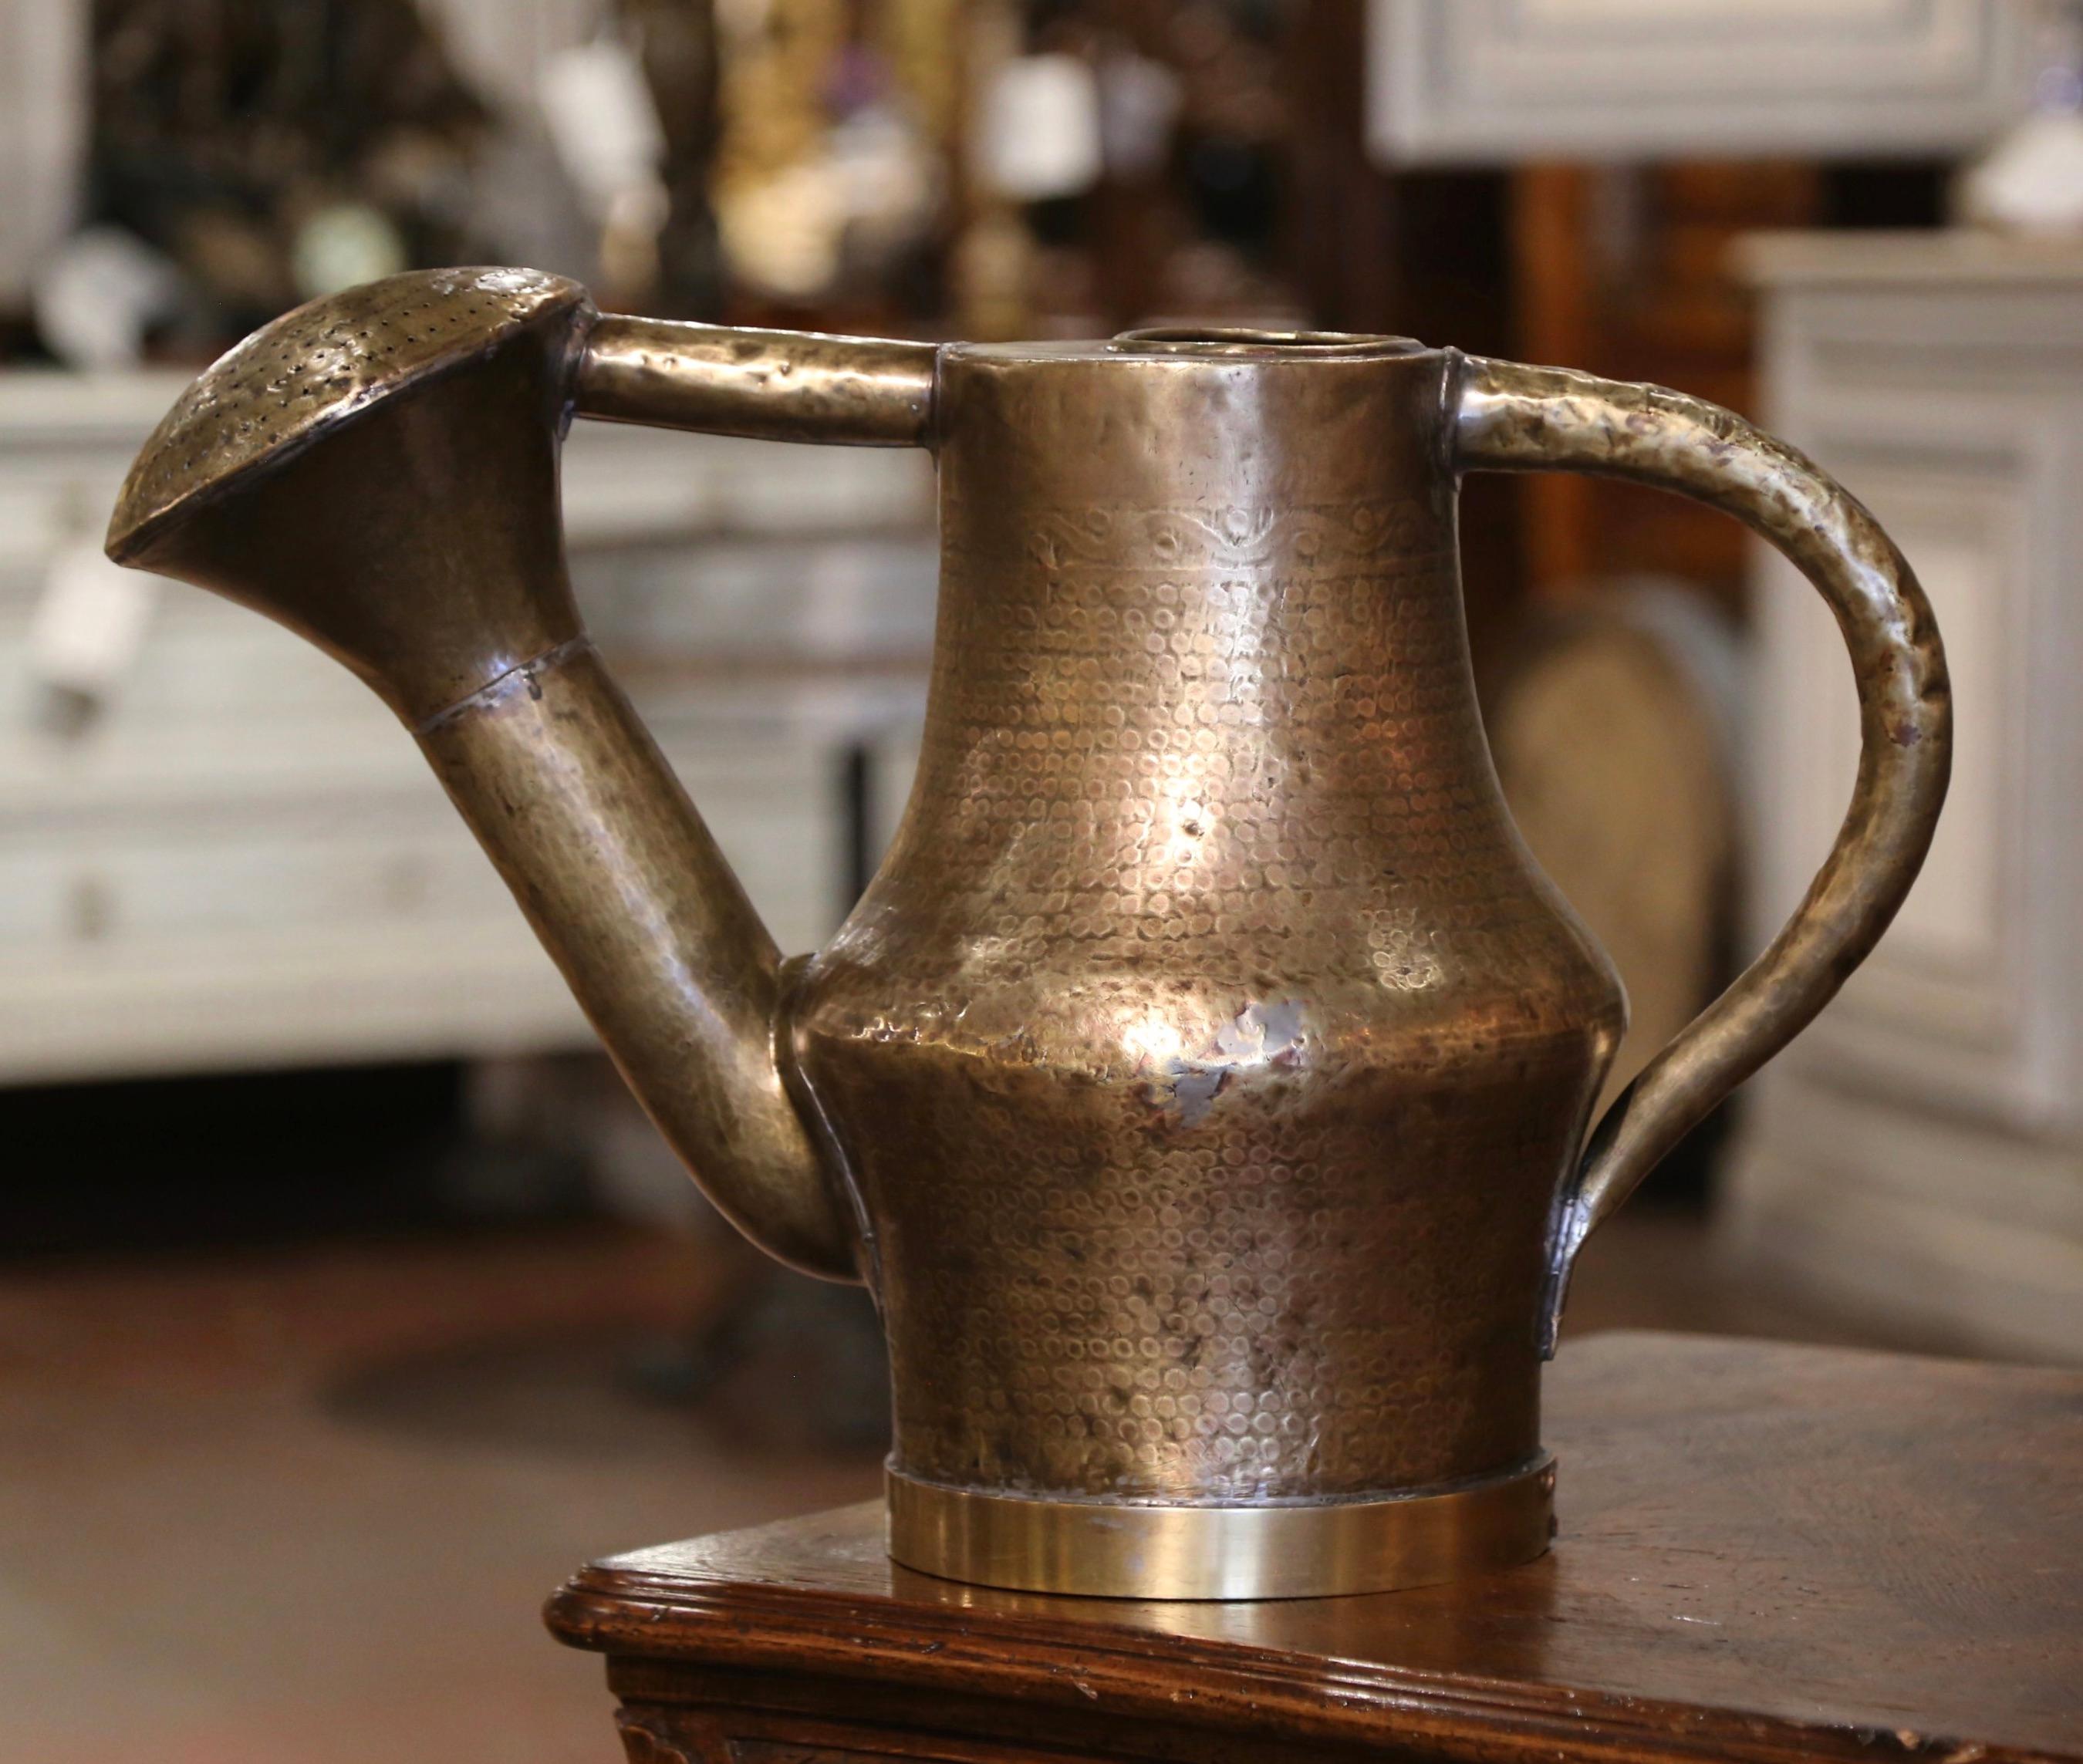 Decorate kitchen cabinets with this large antique water can. Hand crafted in France circa 1860, and built of brass, the hammered metal construction gives this watering can a charming and unique character. Designed with a gracefully curved handle and